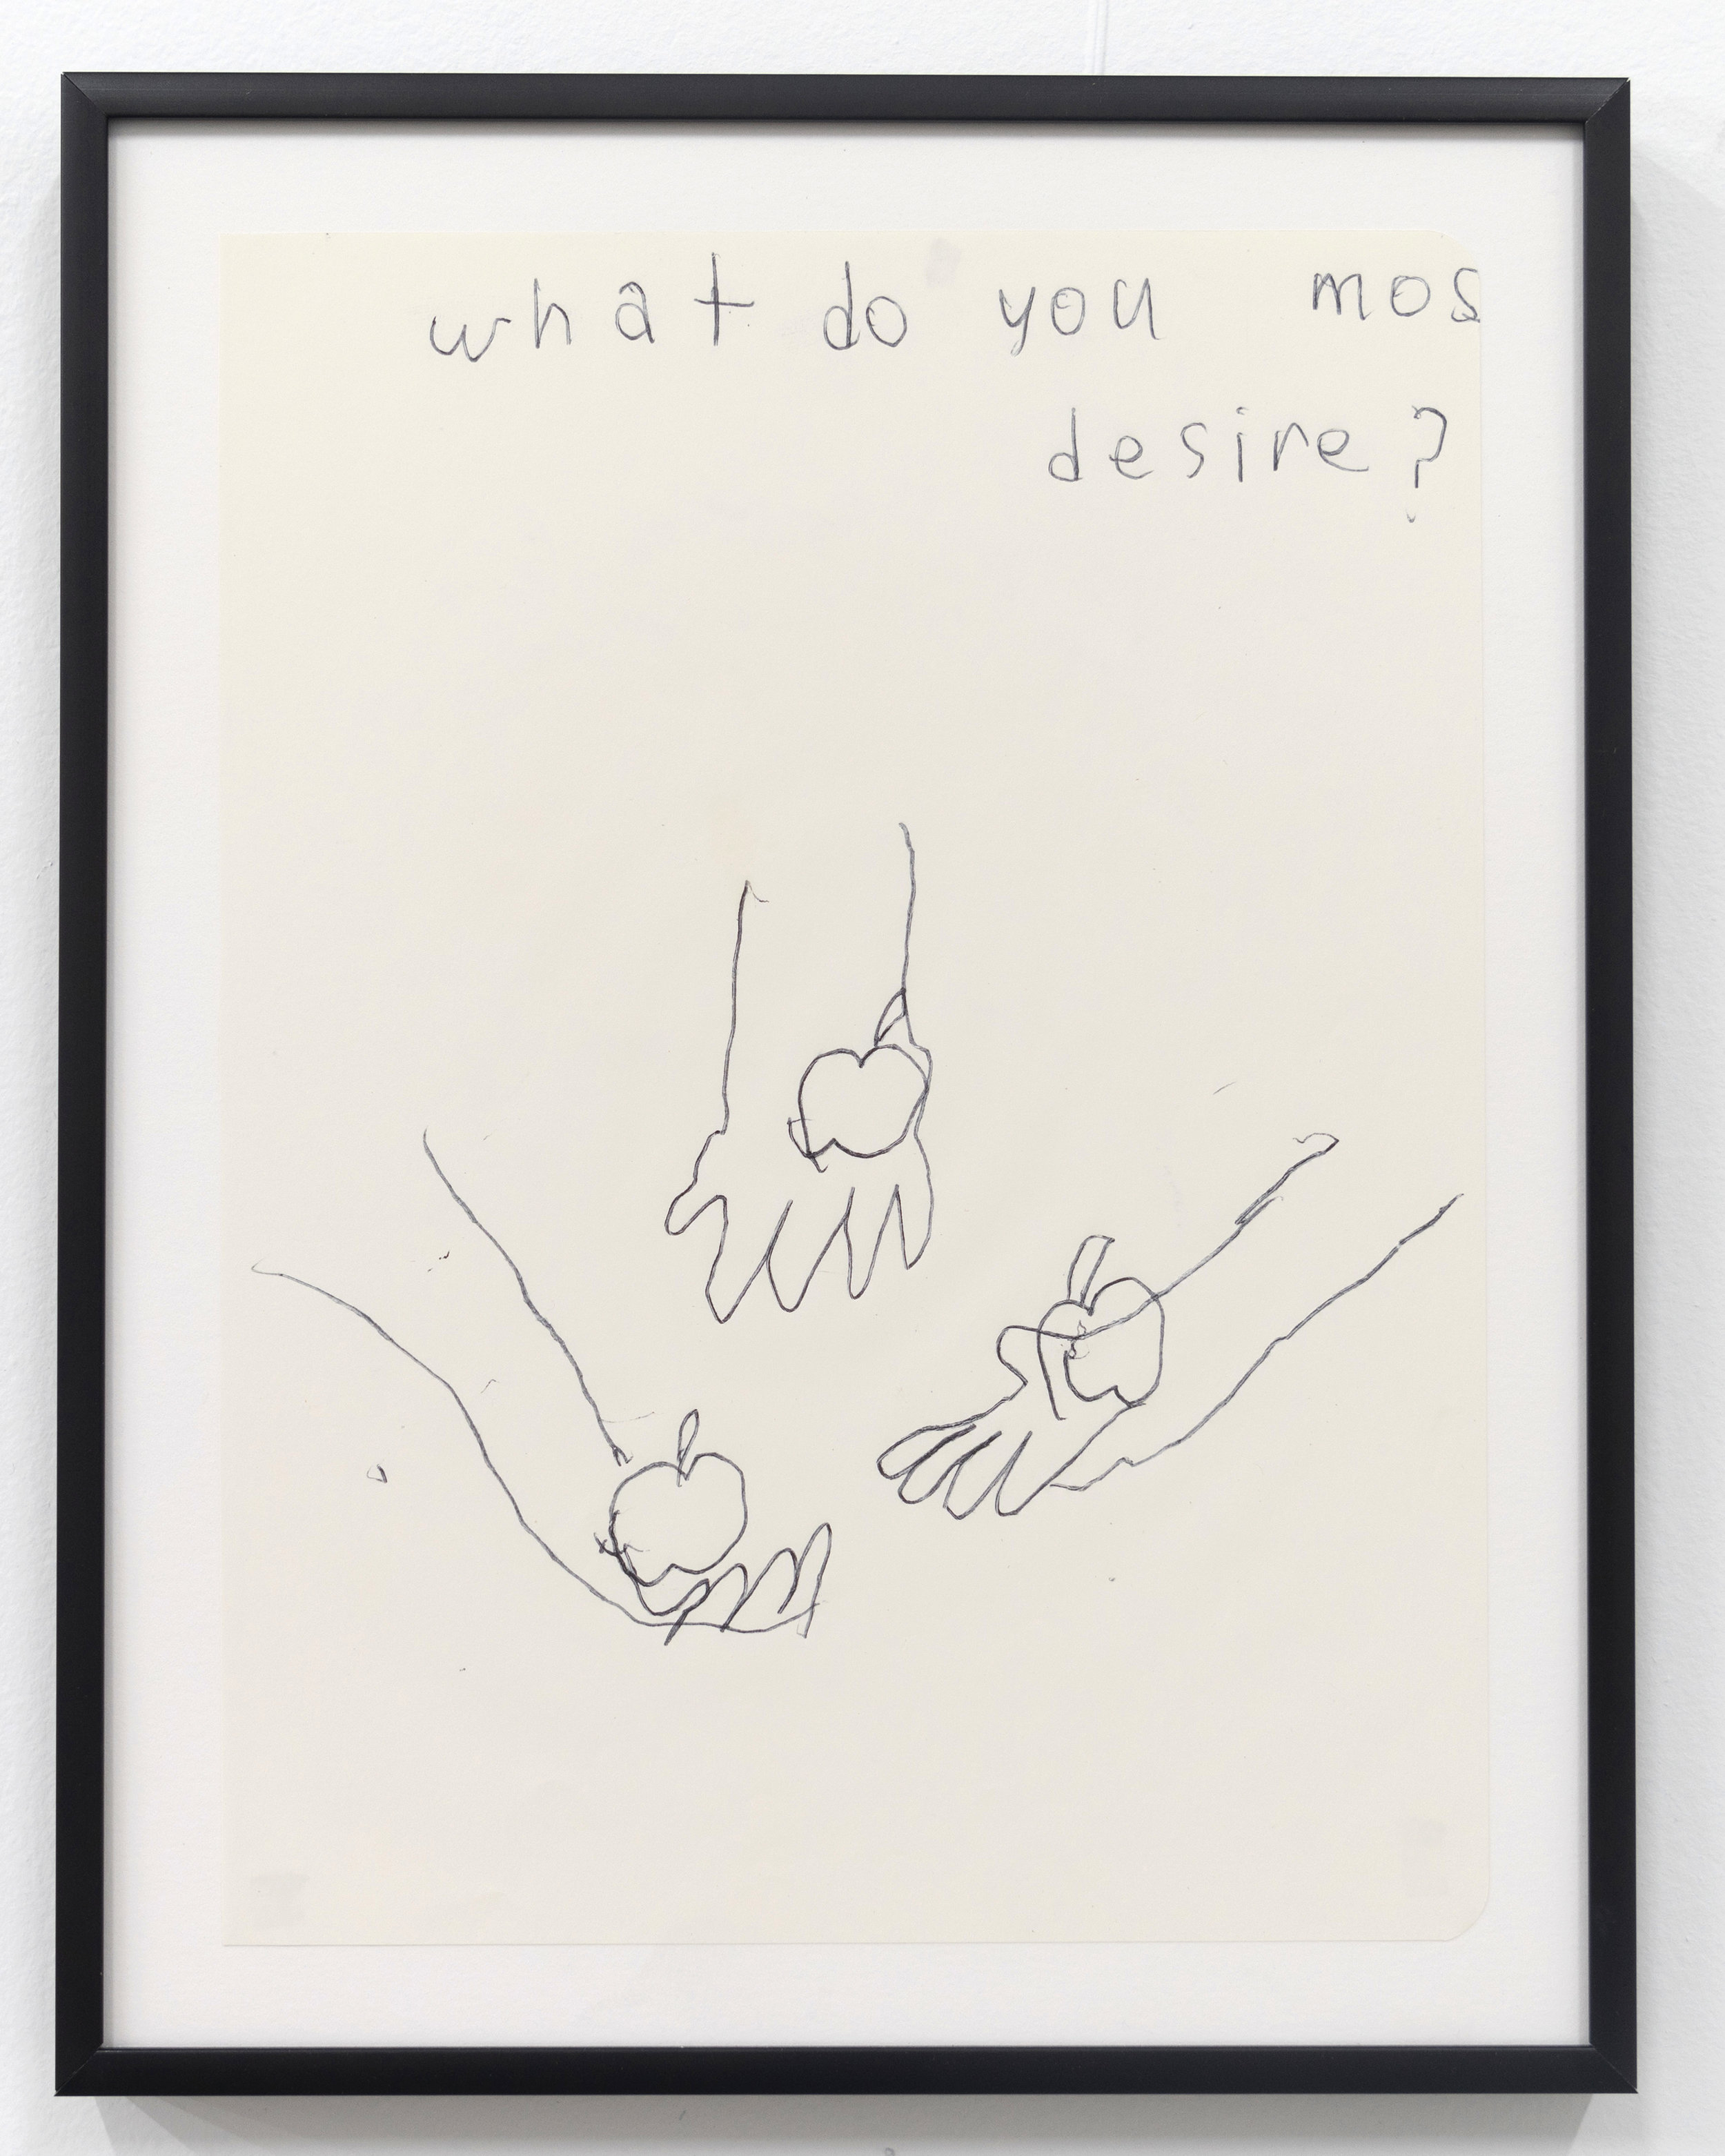  Emilie Gossiaux,  What Do You Most Desire , 2018, ink on Newsprint, 11 1/2 x 9 1/8 inches 